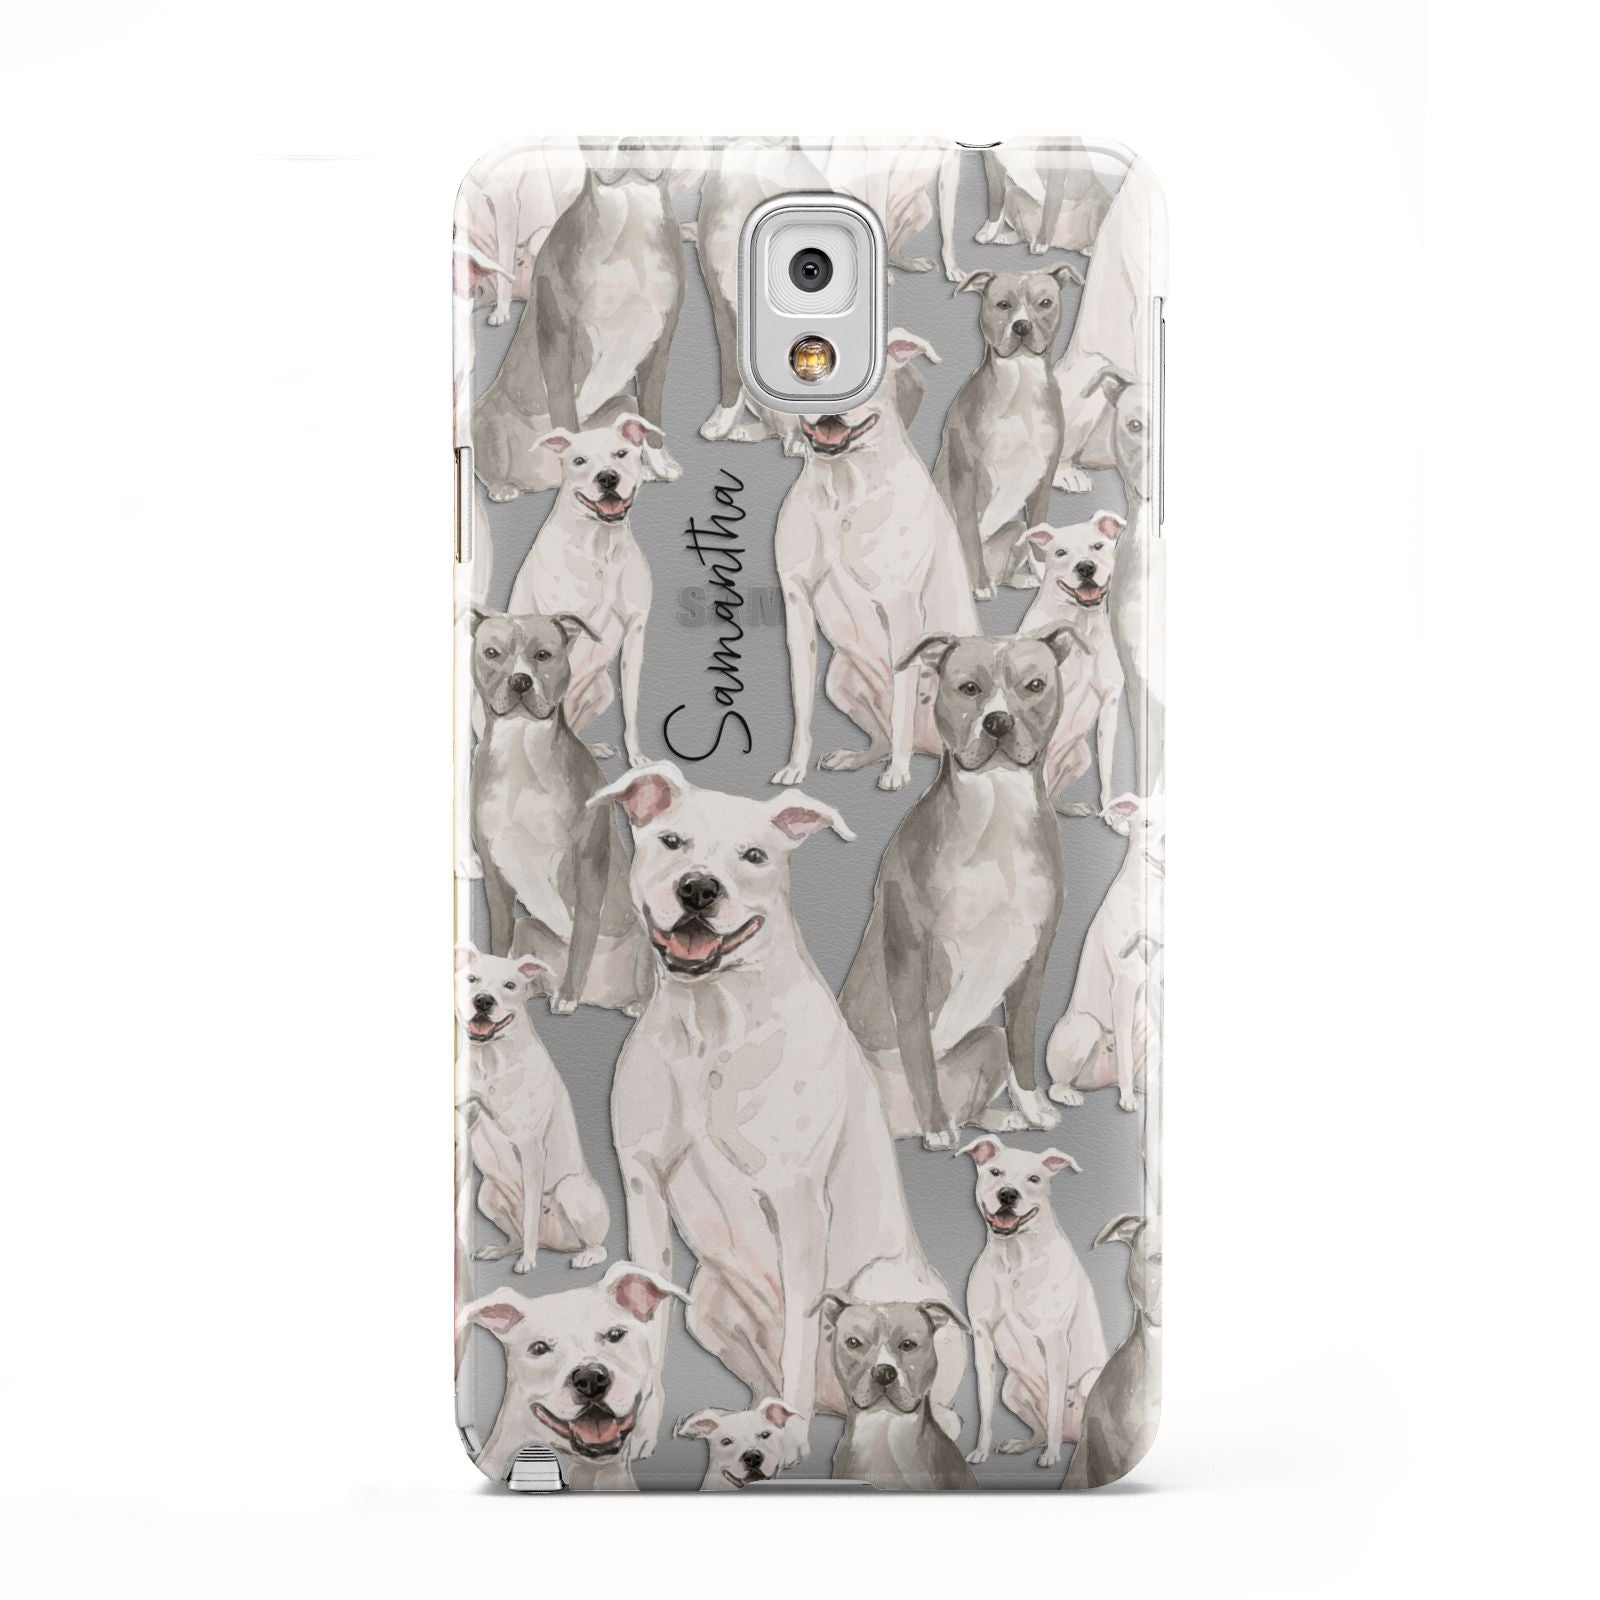 Personalised Staffordshire Dog Samsung Galaxy Note 3 Case